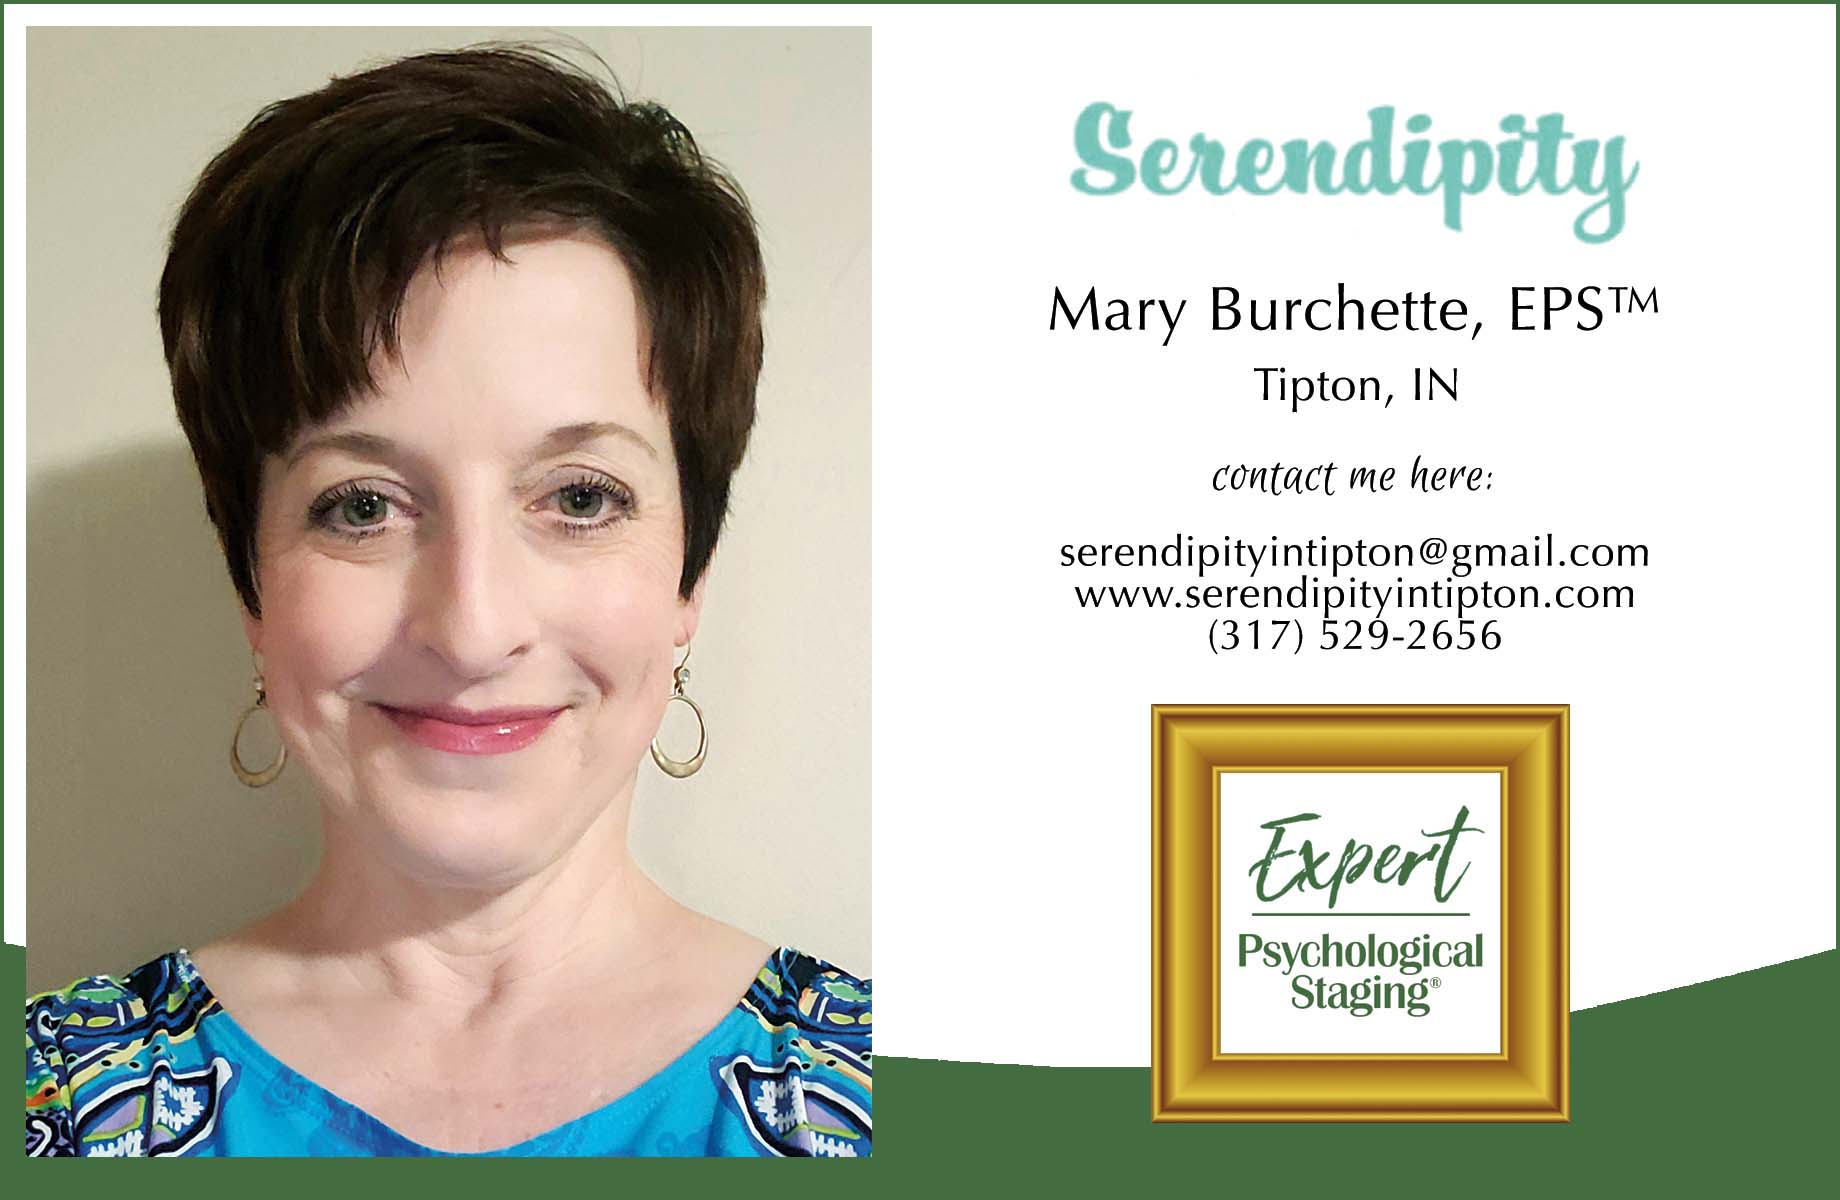 Mary Burchette Expert Psychological Staging Tipton, IN